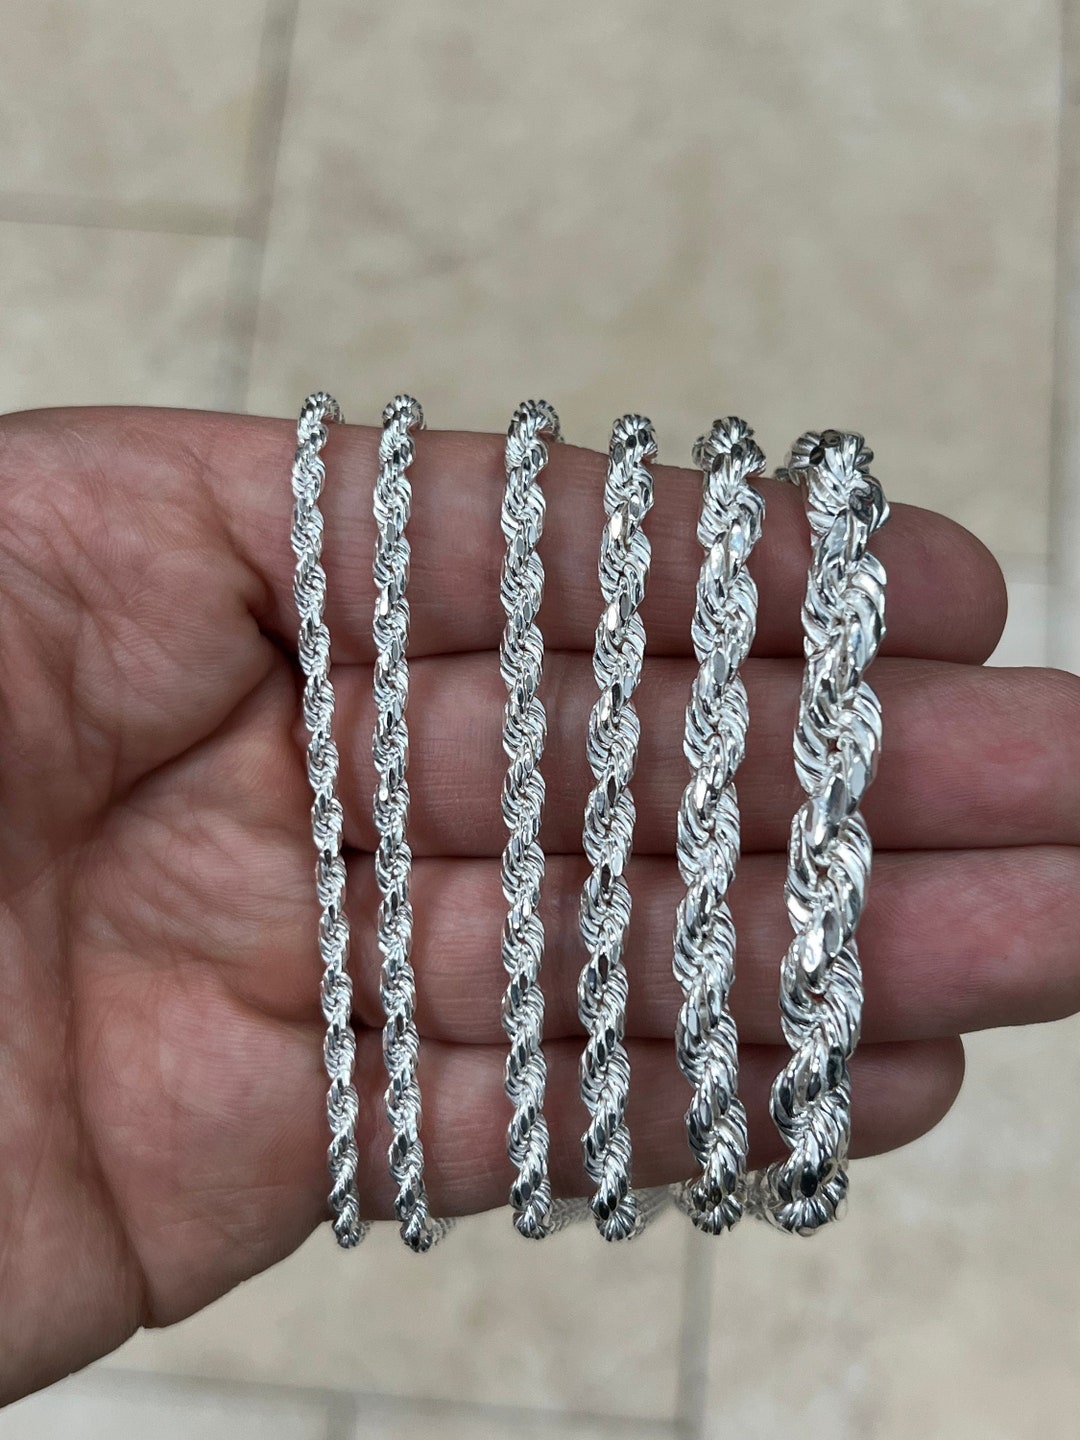 Real Solid 925 Sterling Silver 11mm Thick Men's Rope Chain